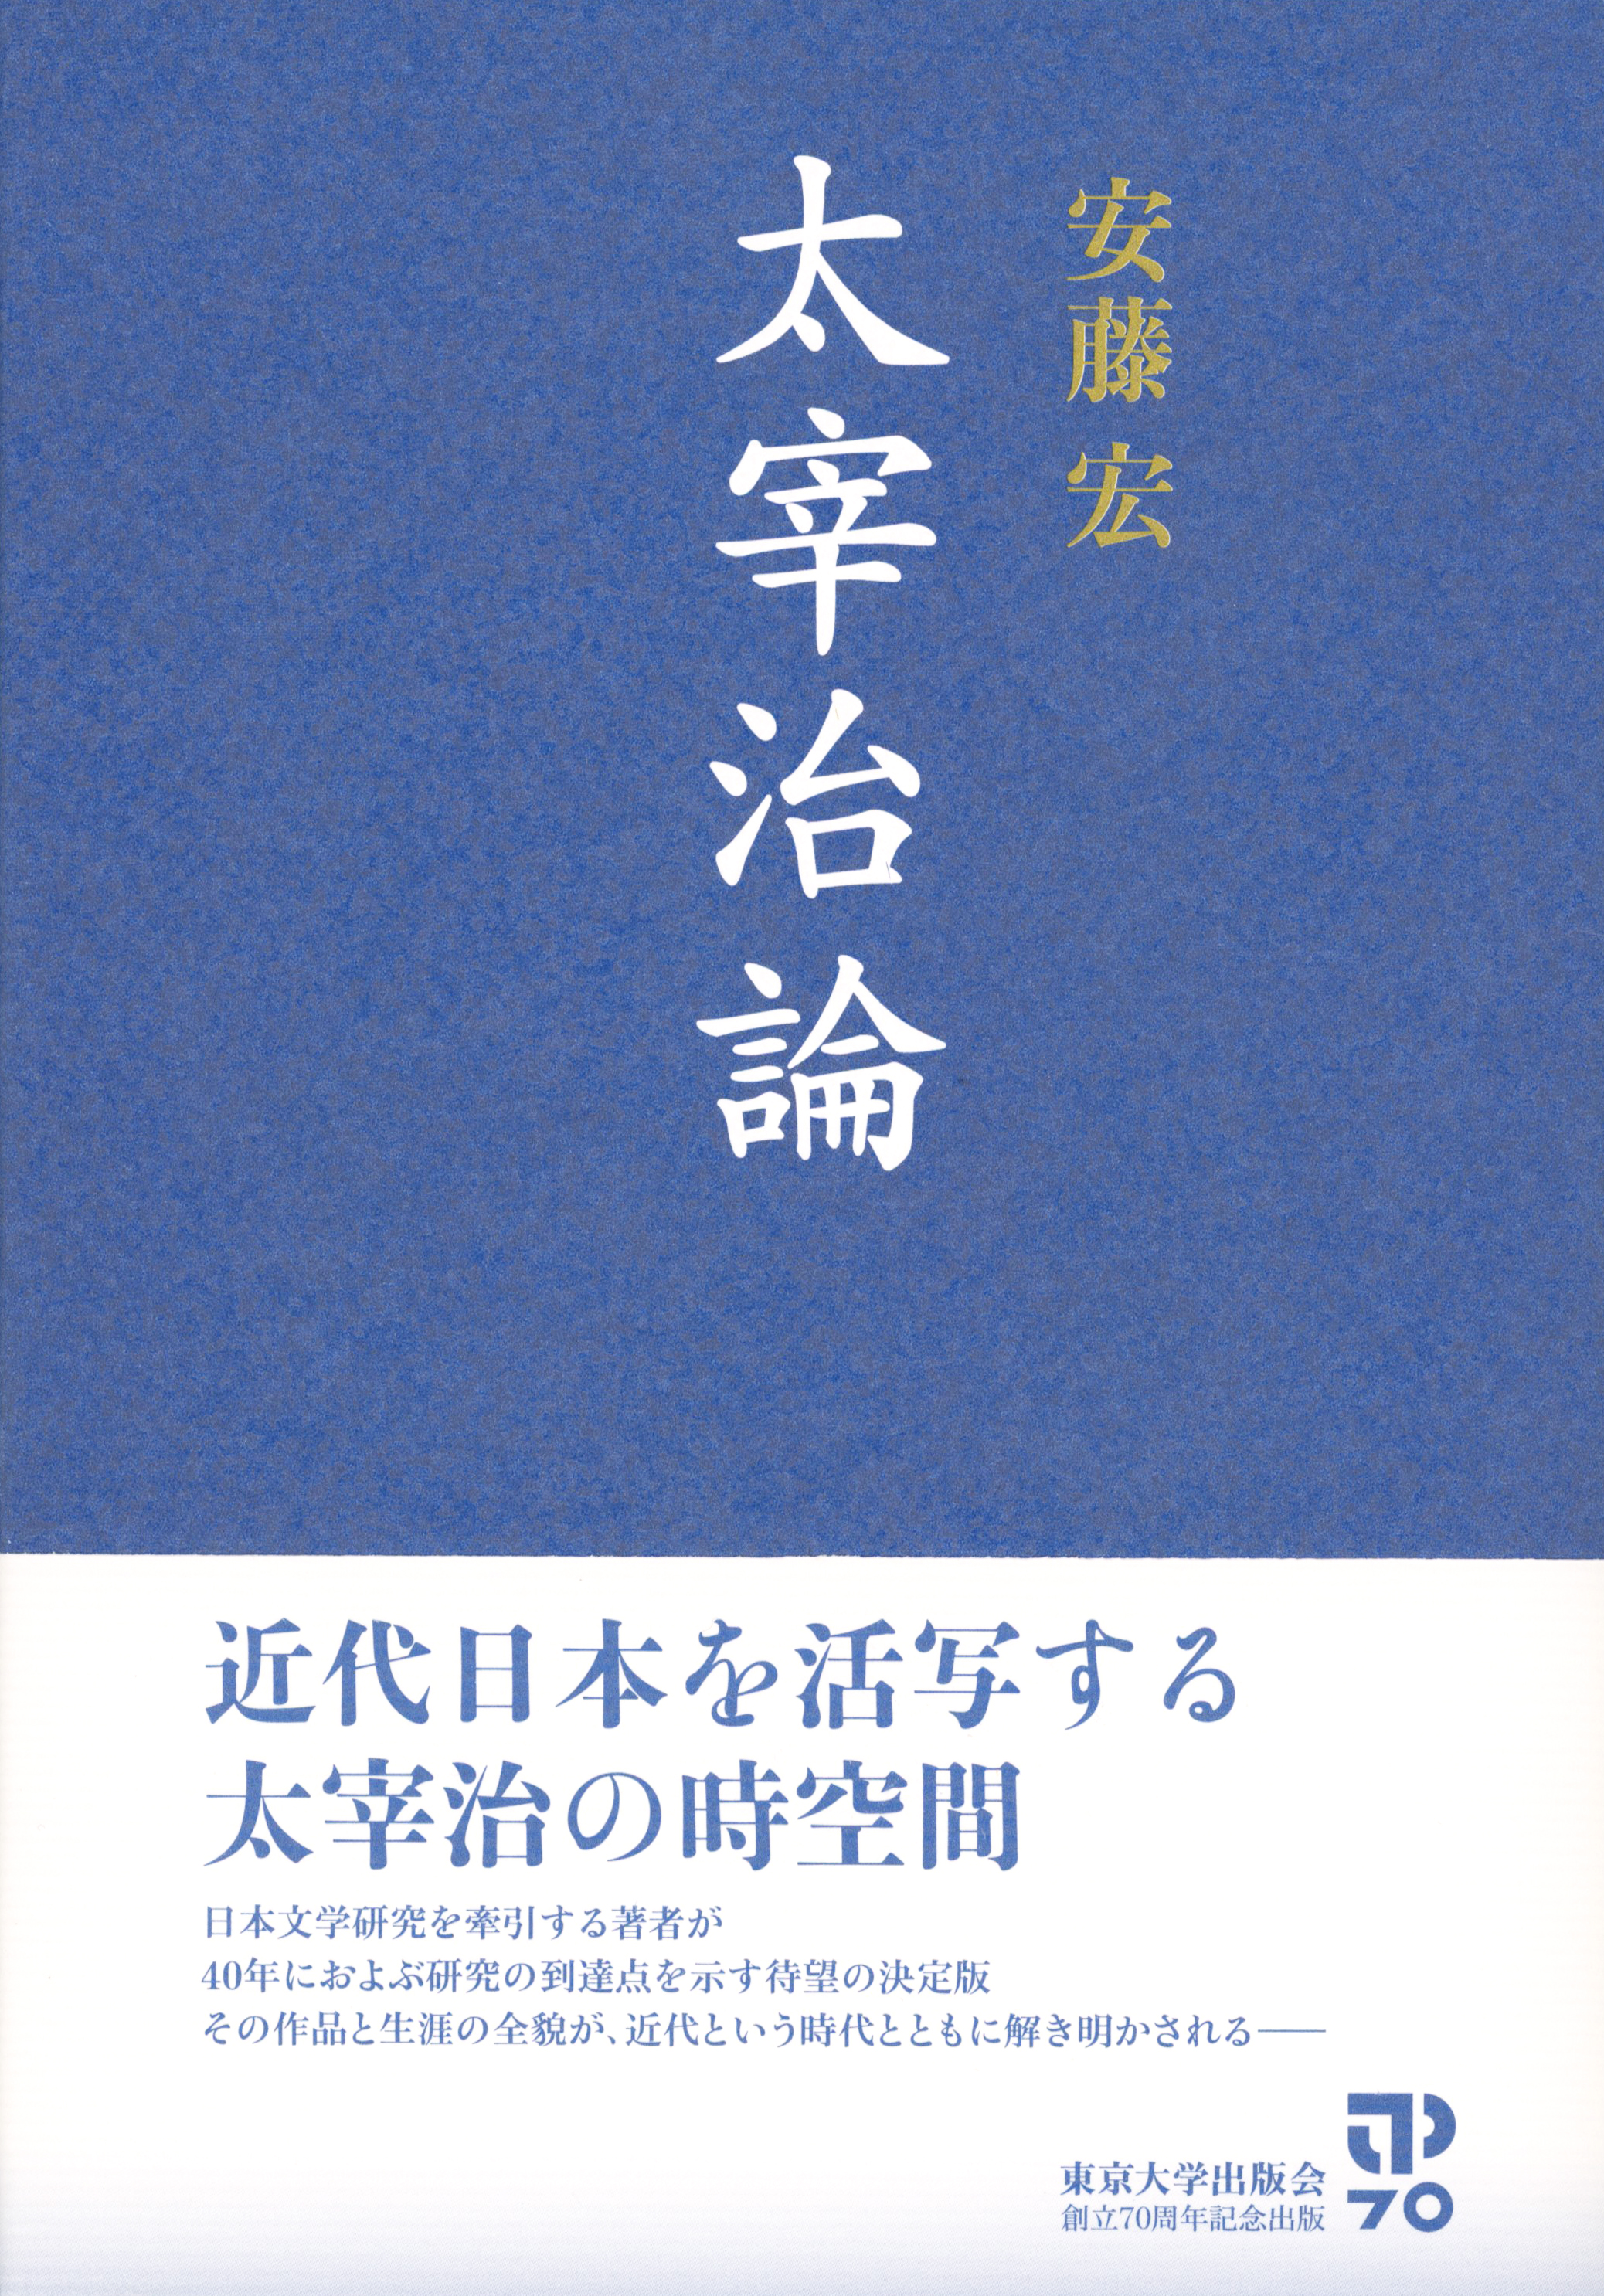 Title on blue cover